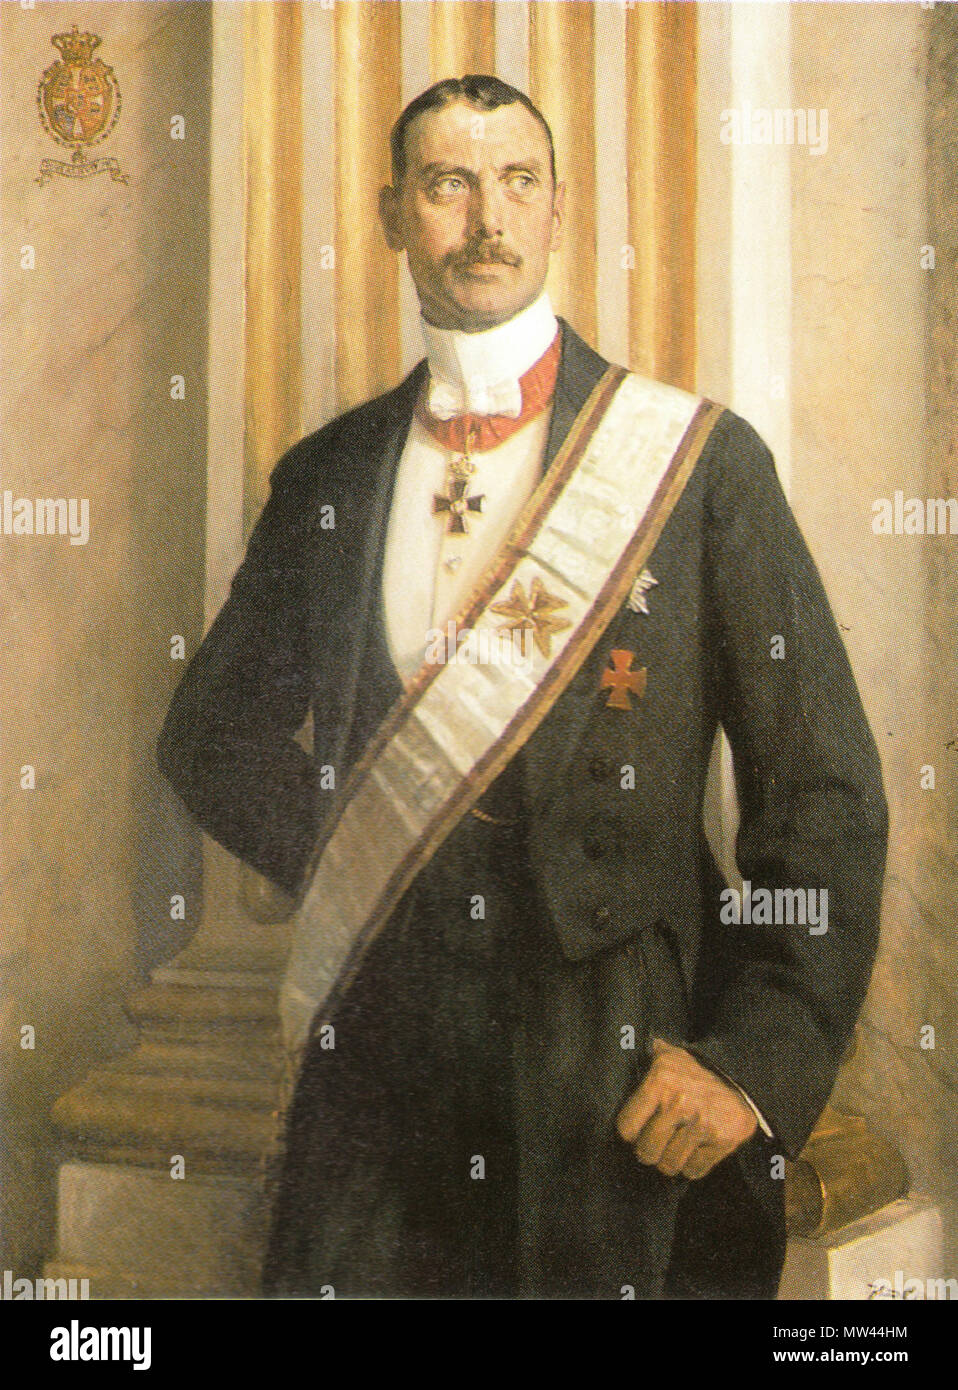 . English: King Christian X of Denmark in his freemasonic clothing and the Swedish Order of Charles XIII around his neck. Christian X was a freemason of The Danish Order of Freemasons. Dansk: Kong Christian X af Danmark i sin frimurerbeklædning. Christian X var frimurer i Den Danske Frimurerorden. 1919. Artist Knud Larsen (1865-1922) [1] 340 King Christian X of Denmark Stock Photo